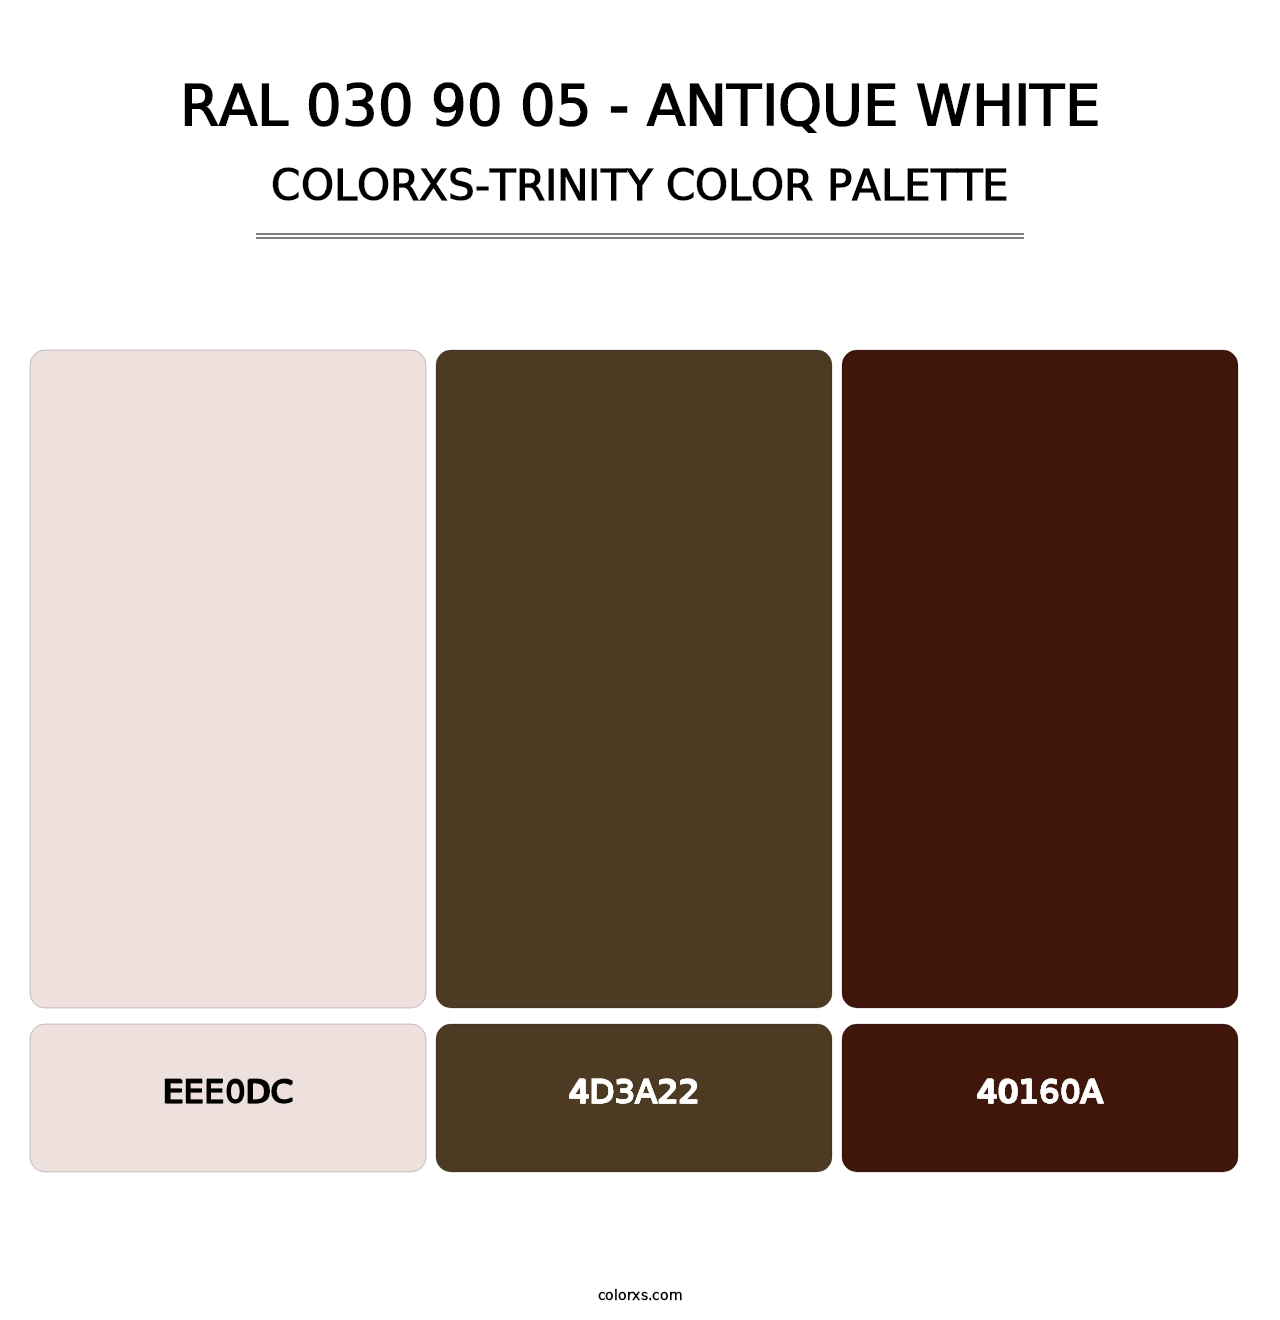 RAL 030 90 05 - Antique White - Colorxs Trinity Palette